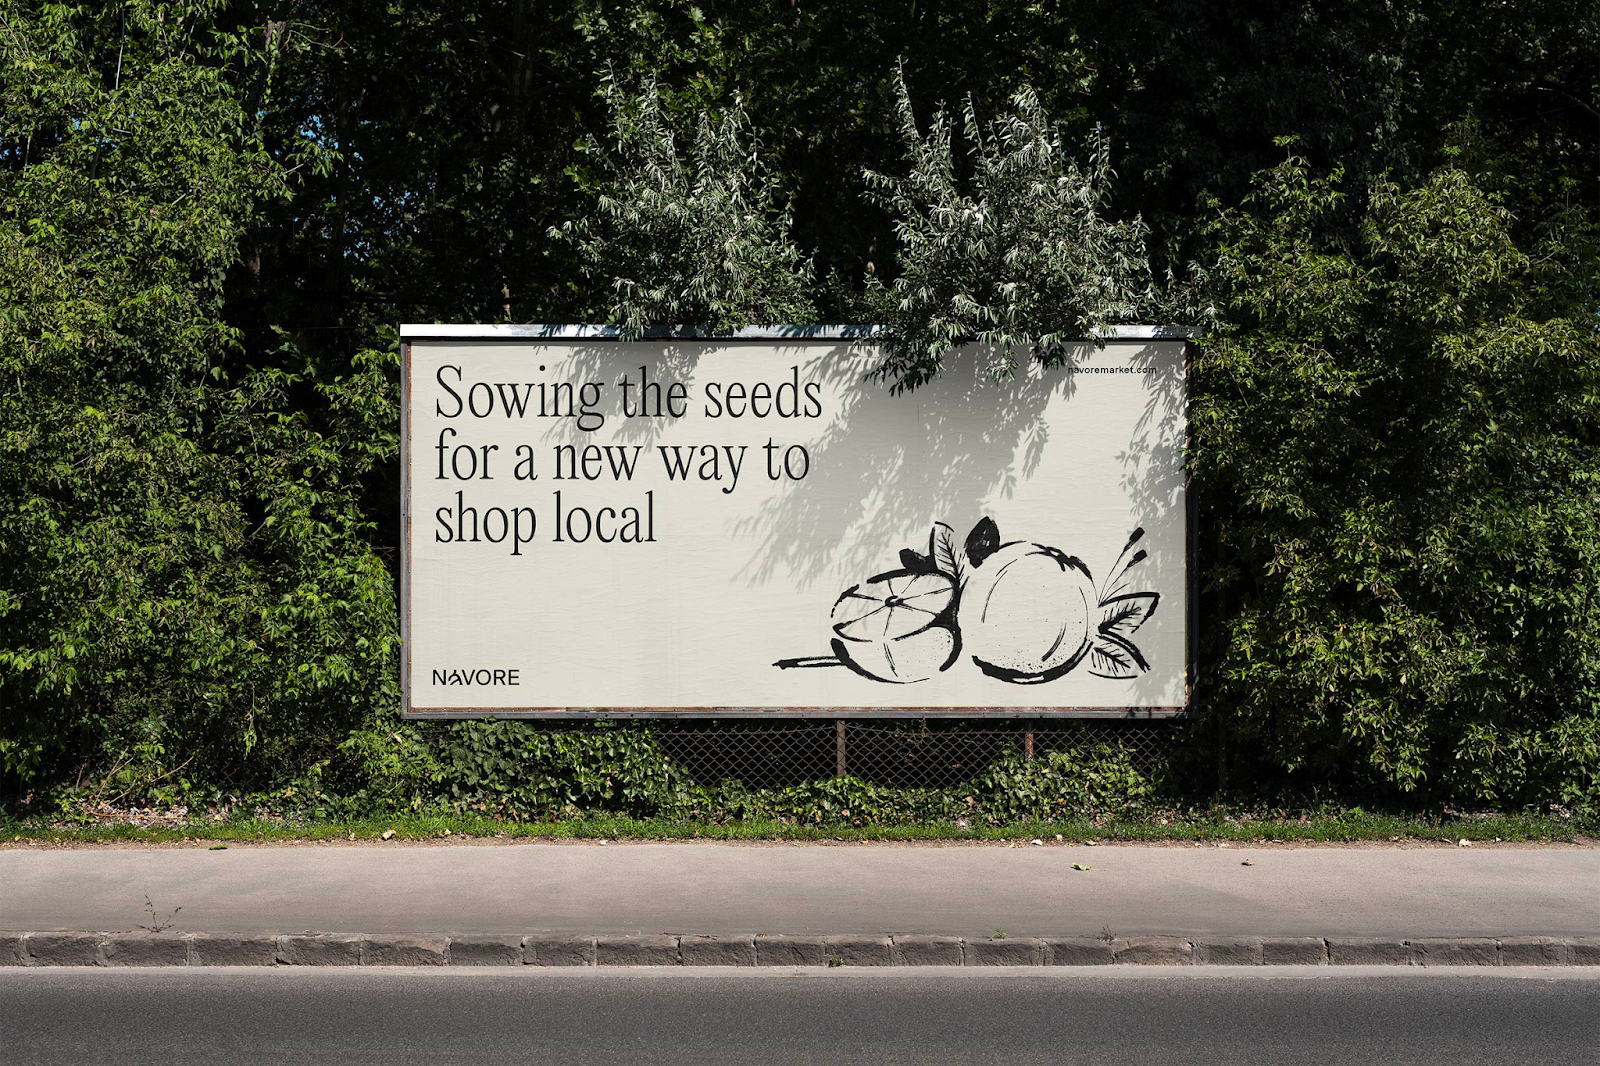 Image from the Návore: Redefining Branding in the Local Produce Market article on Abduzeedo